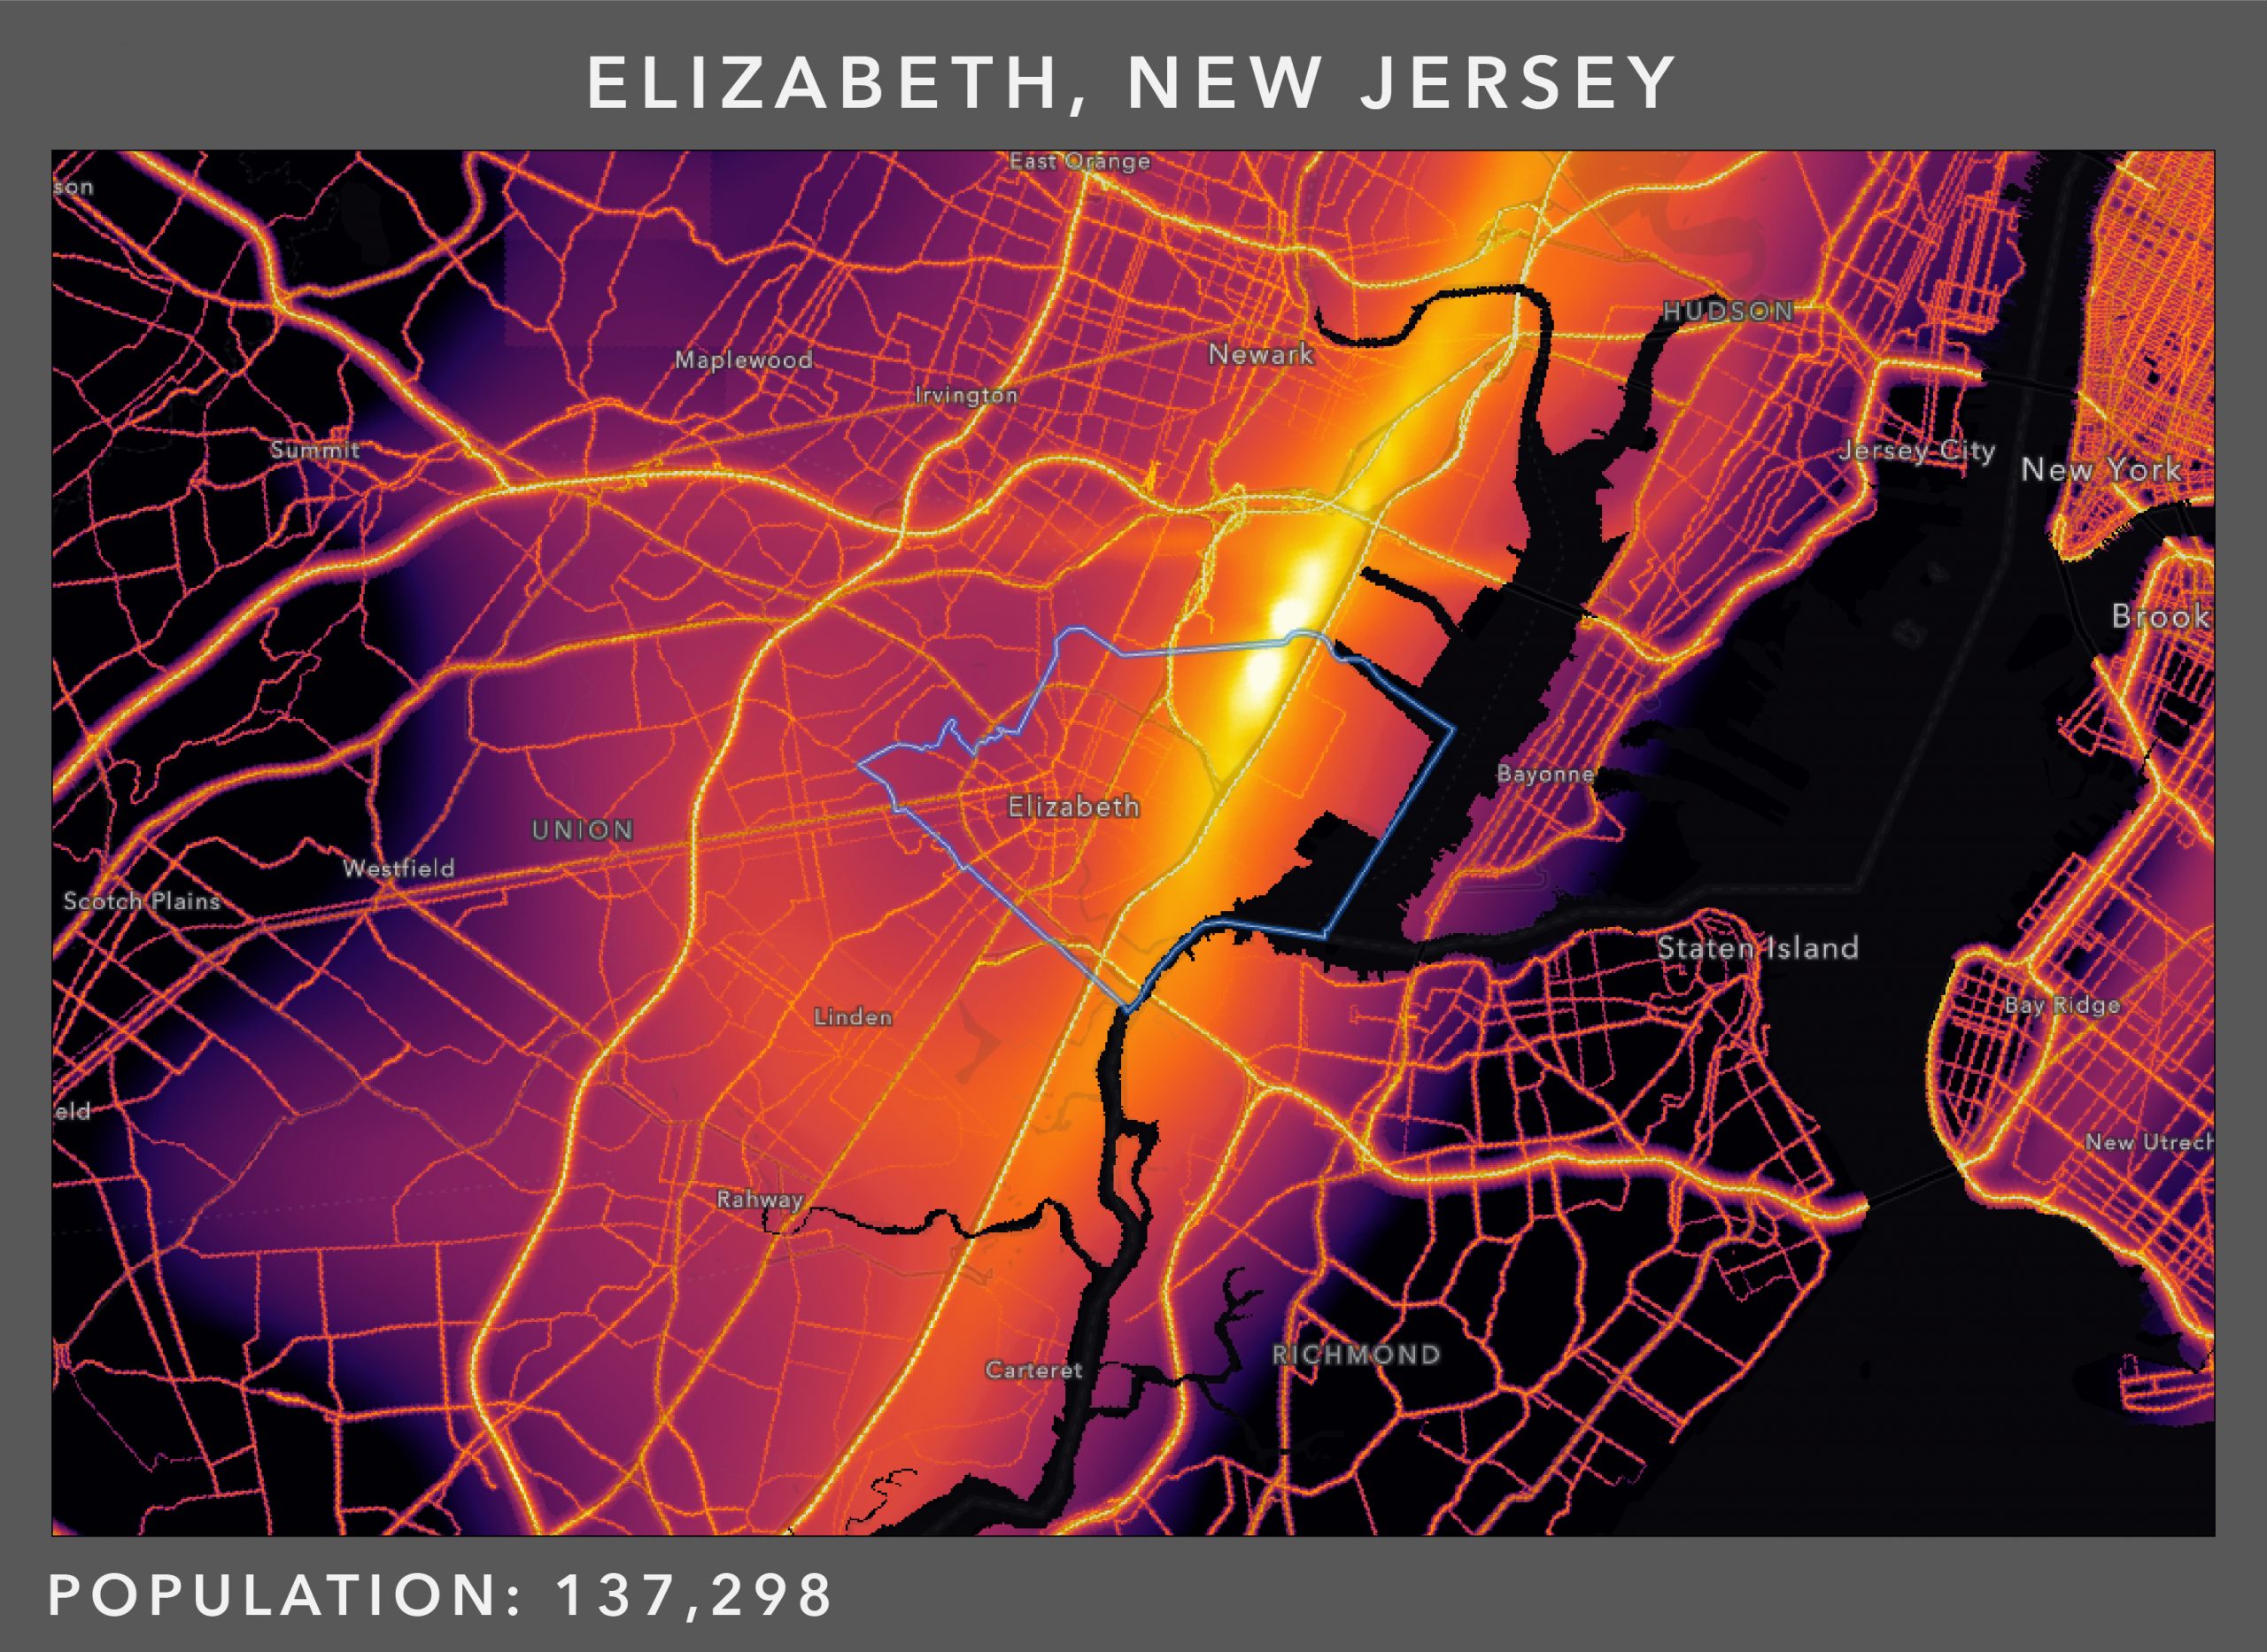 Road analysis for Elizabeth, New Jersey.